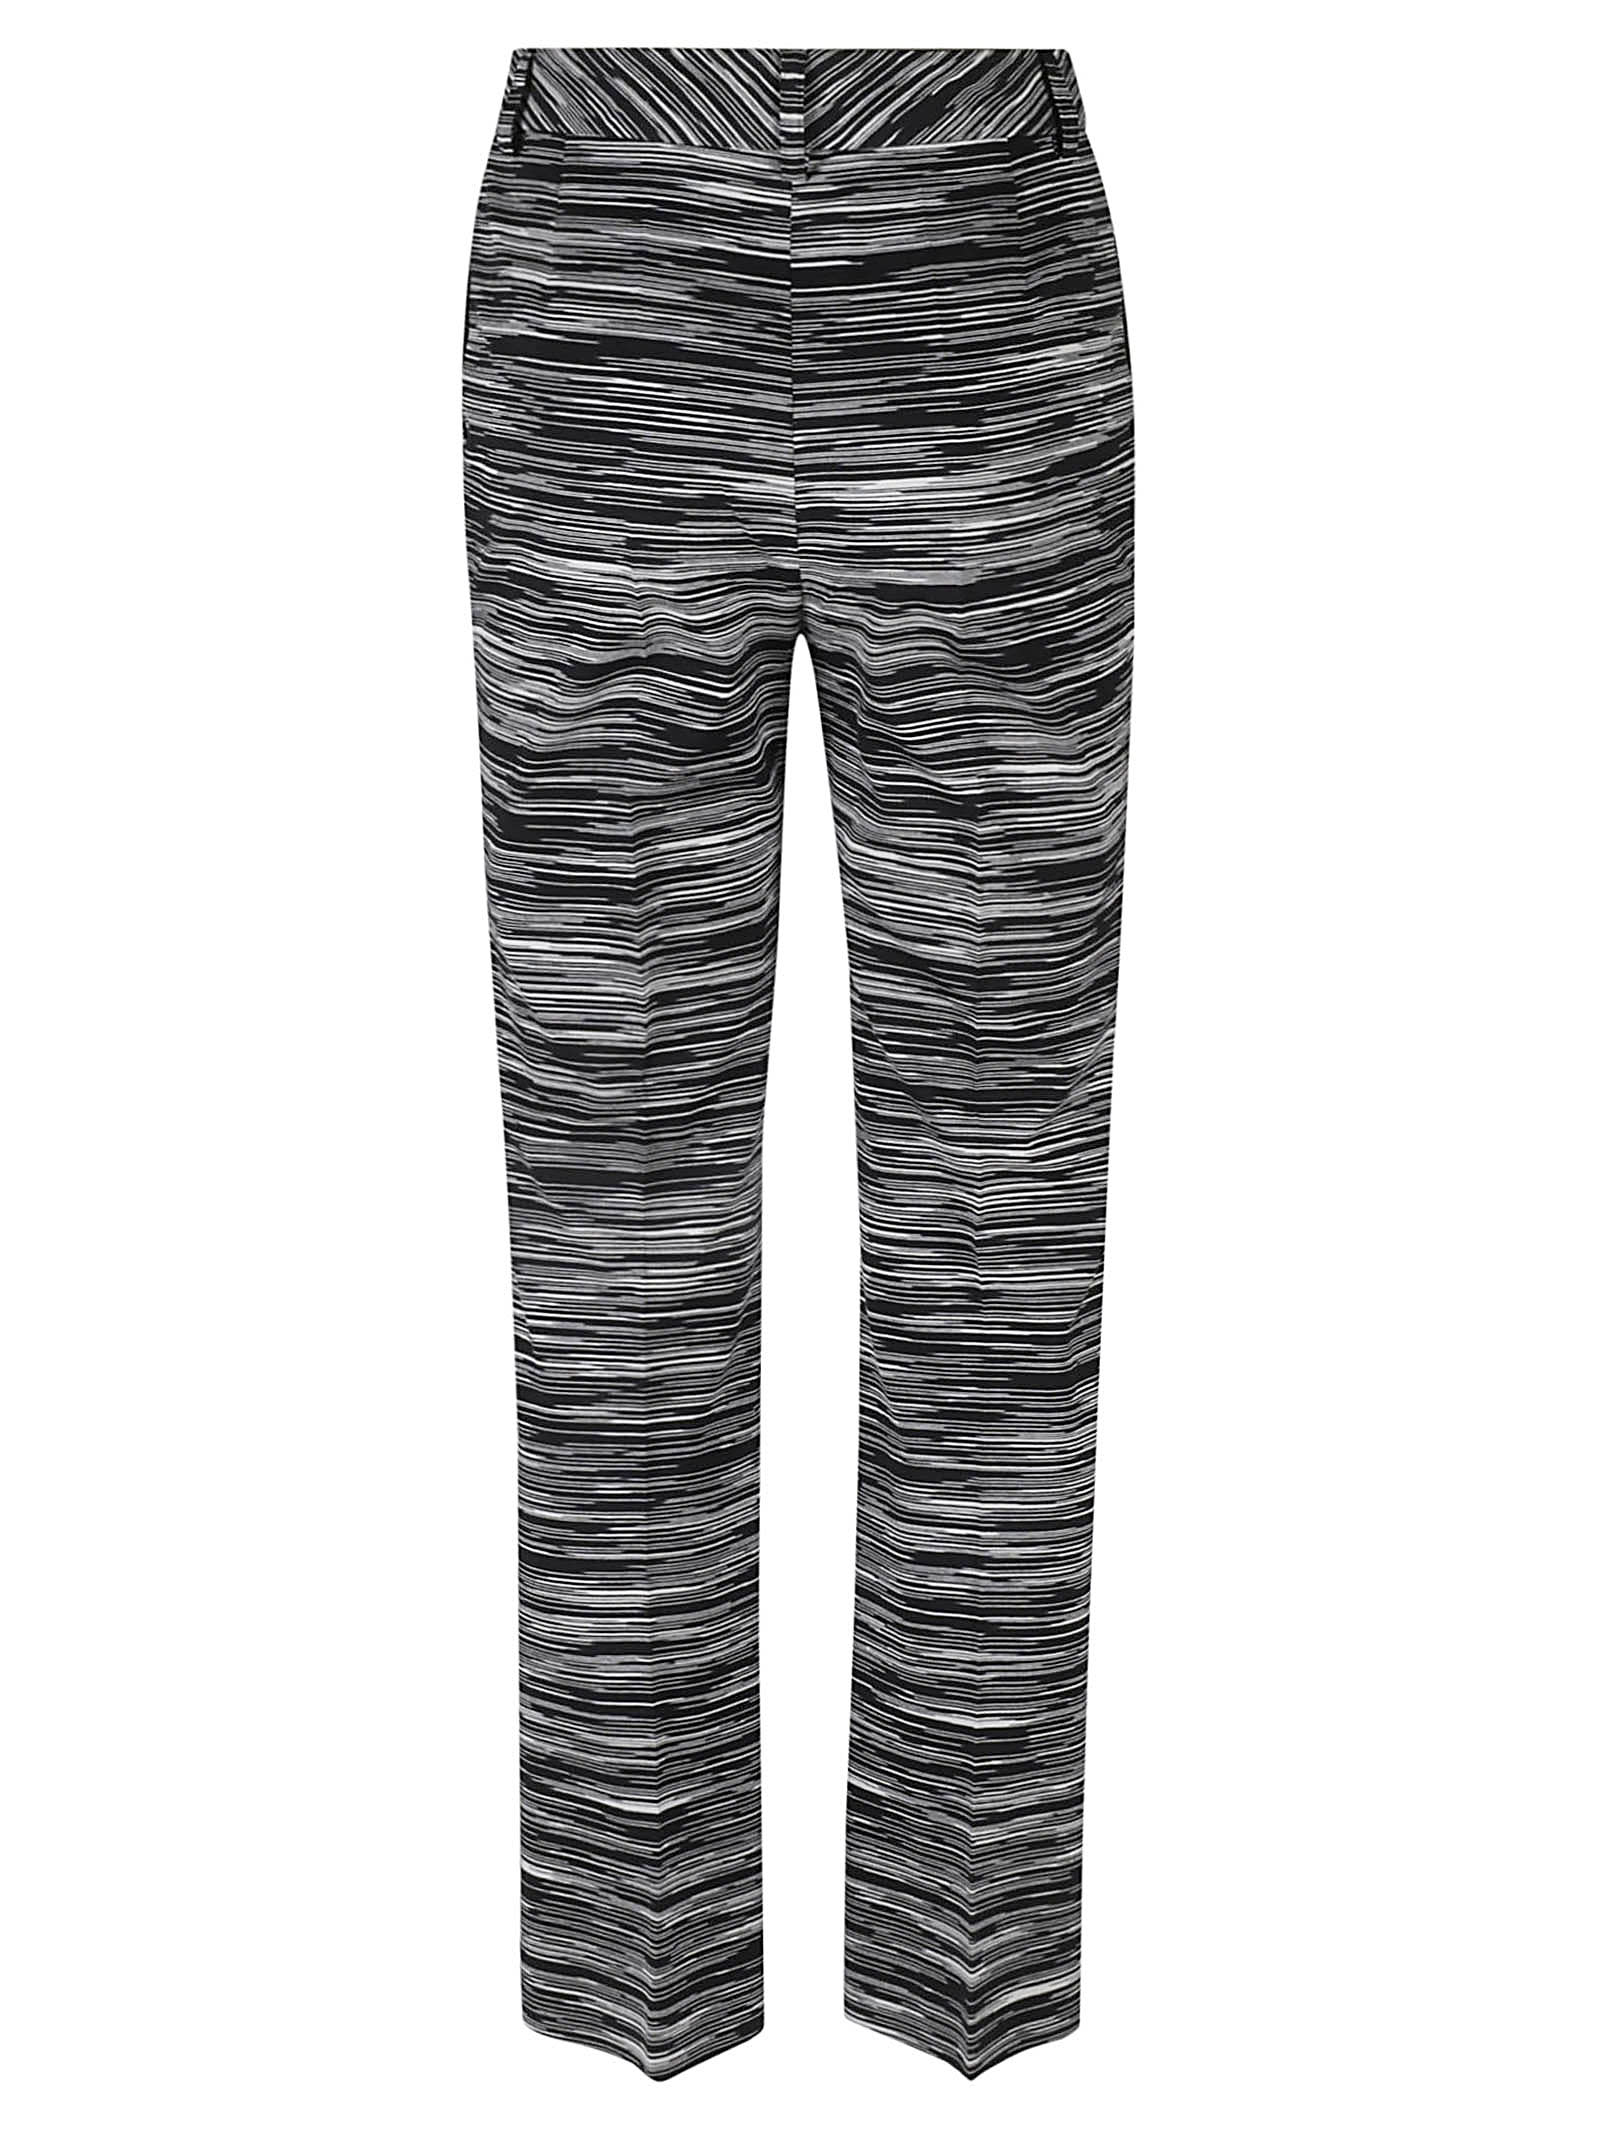 Shop Missoni Concealed Printed Trousers In Black/white